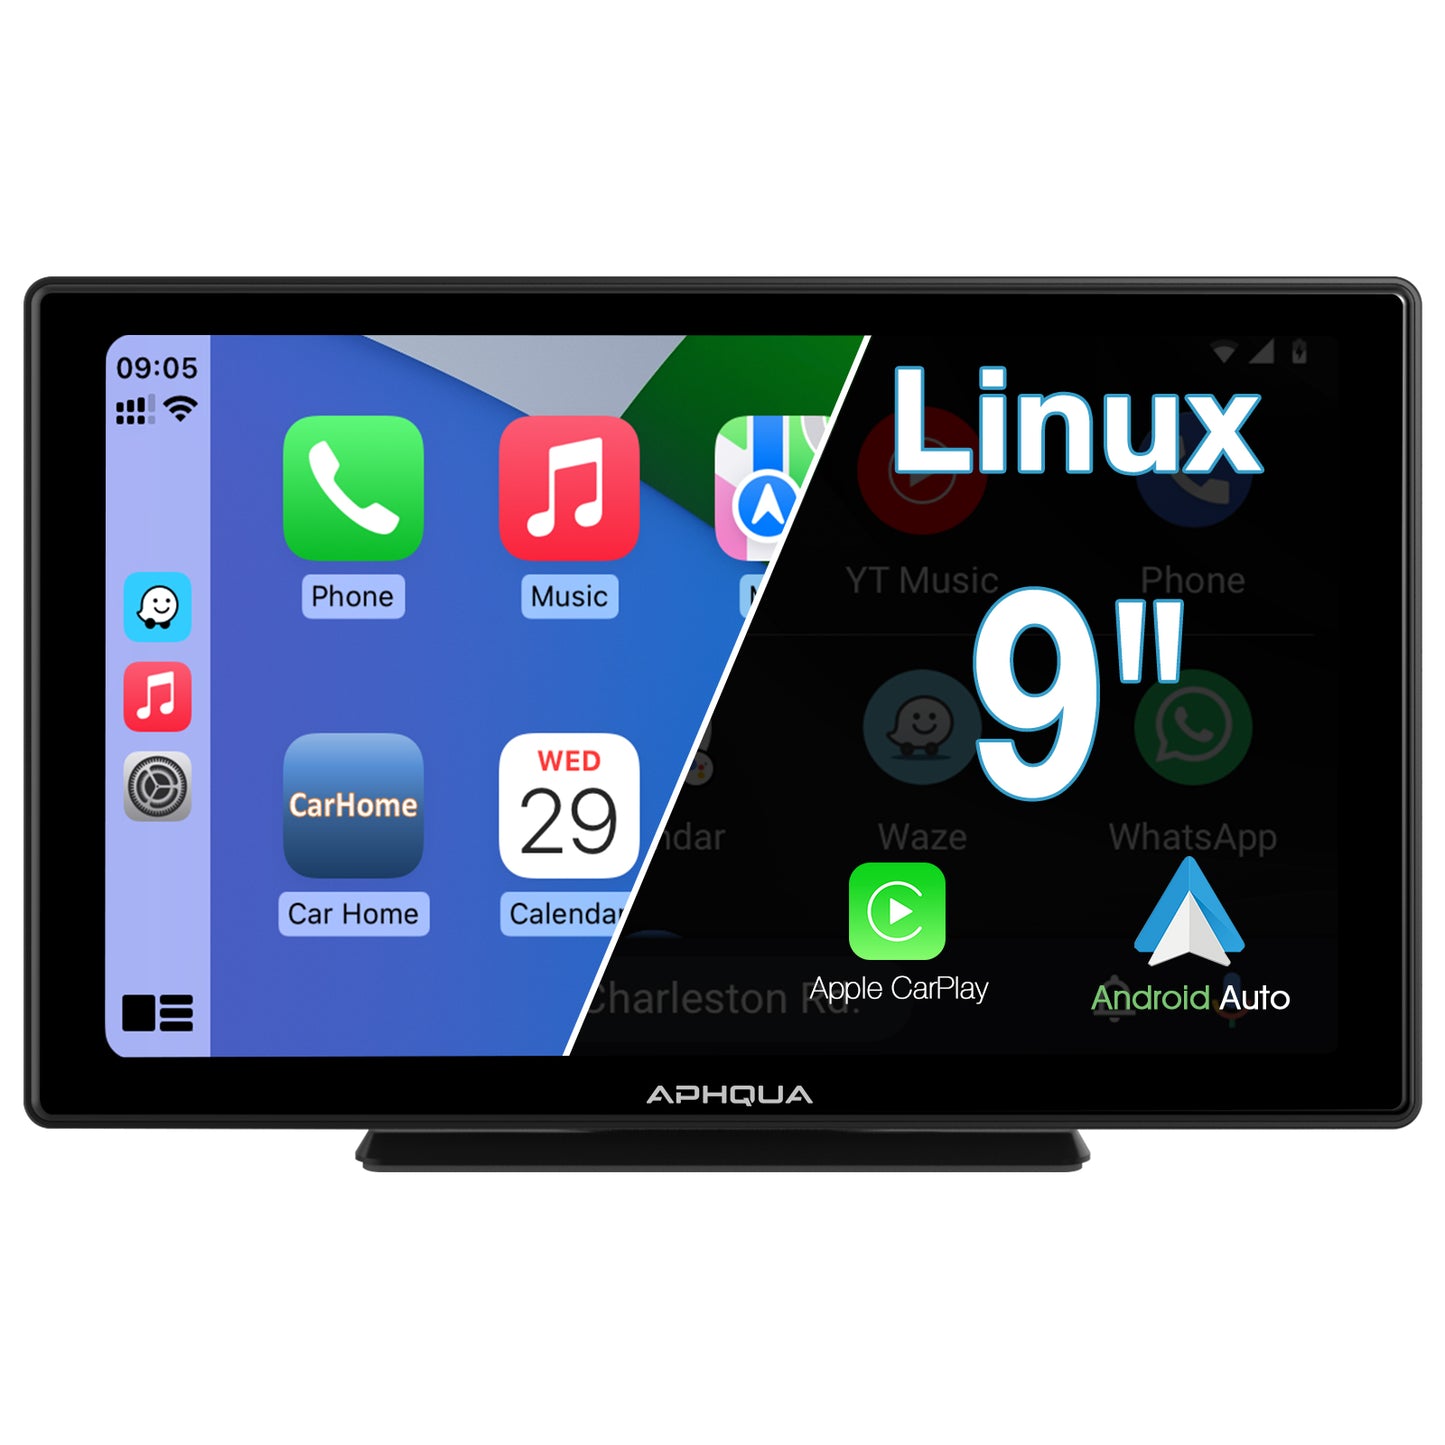 APHQUA Wireless Portable Car Stereo with Light-Sensitive, 9 Inch IPS Touchscreen Car Radio Receiver Works with Carplay, Android Auto, Mirror, Bluetooth, Google, Siri, WiFi, GPS Navigation